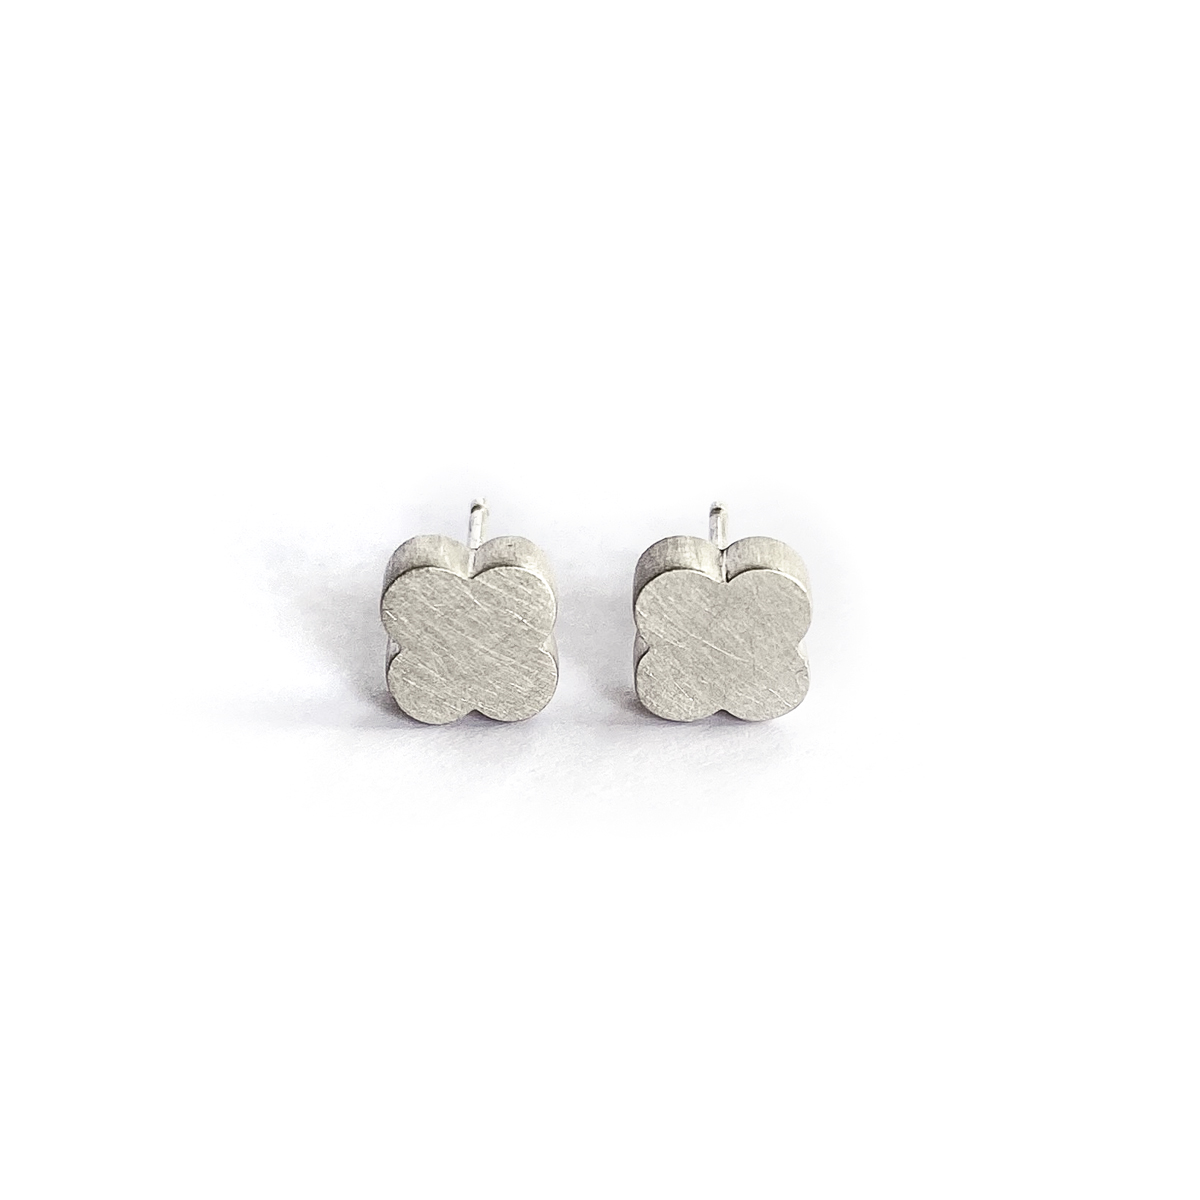 Reverence Studs , silver, 2020, Kate Alterio